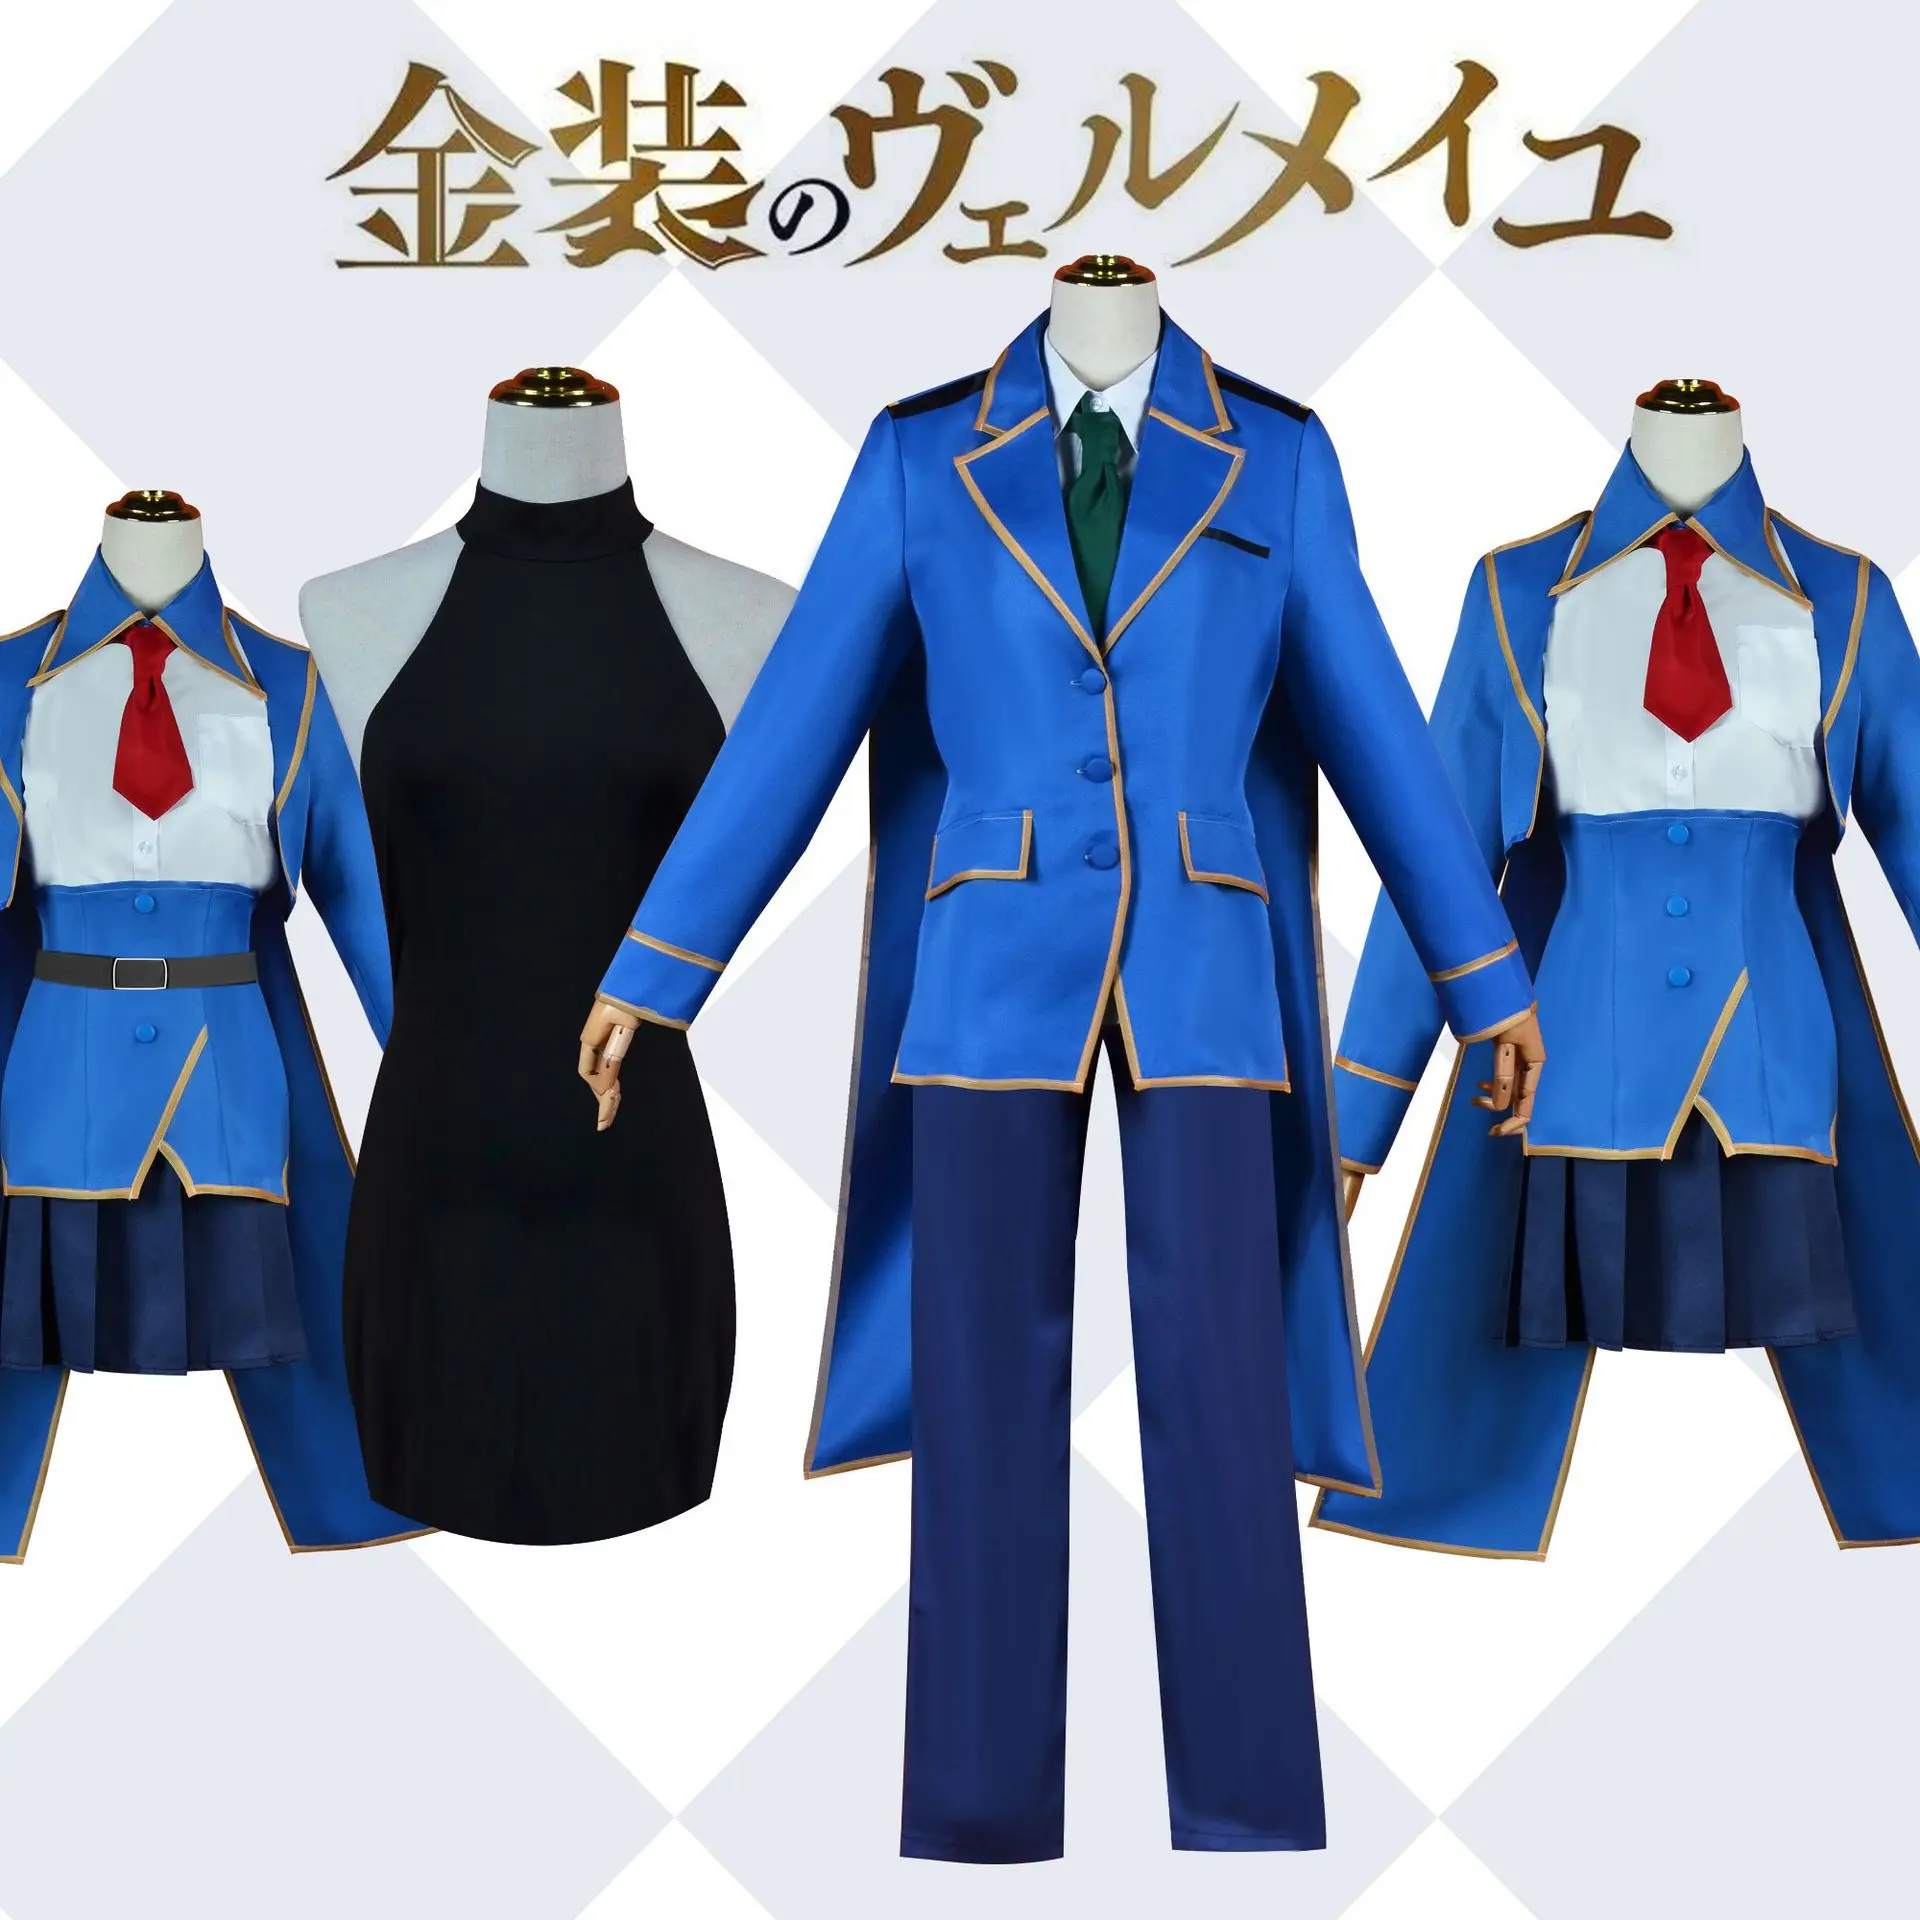 

Anime Comics Verme Cosplay Costumes Wigs Vermeil in Gold Magical World Uniform Arut Blue Suits Cos Shoes Lillian Dress Coat New